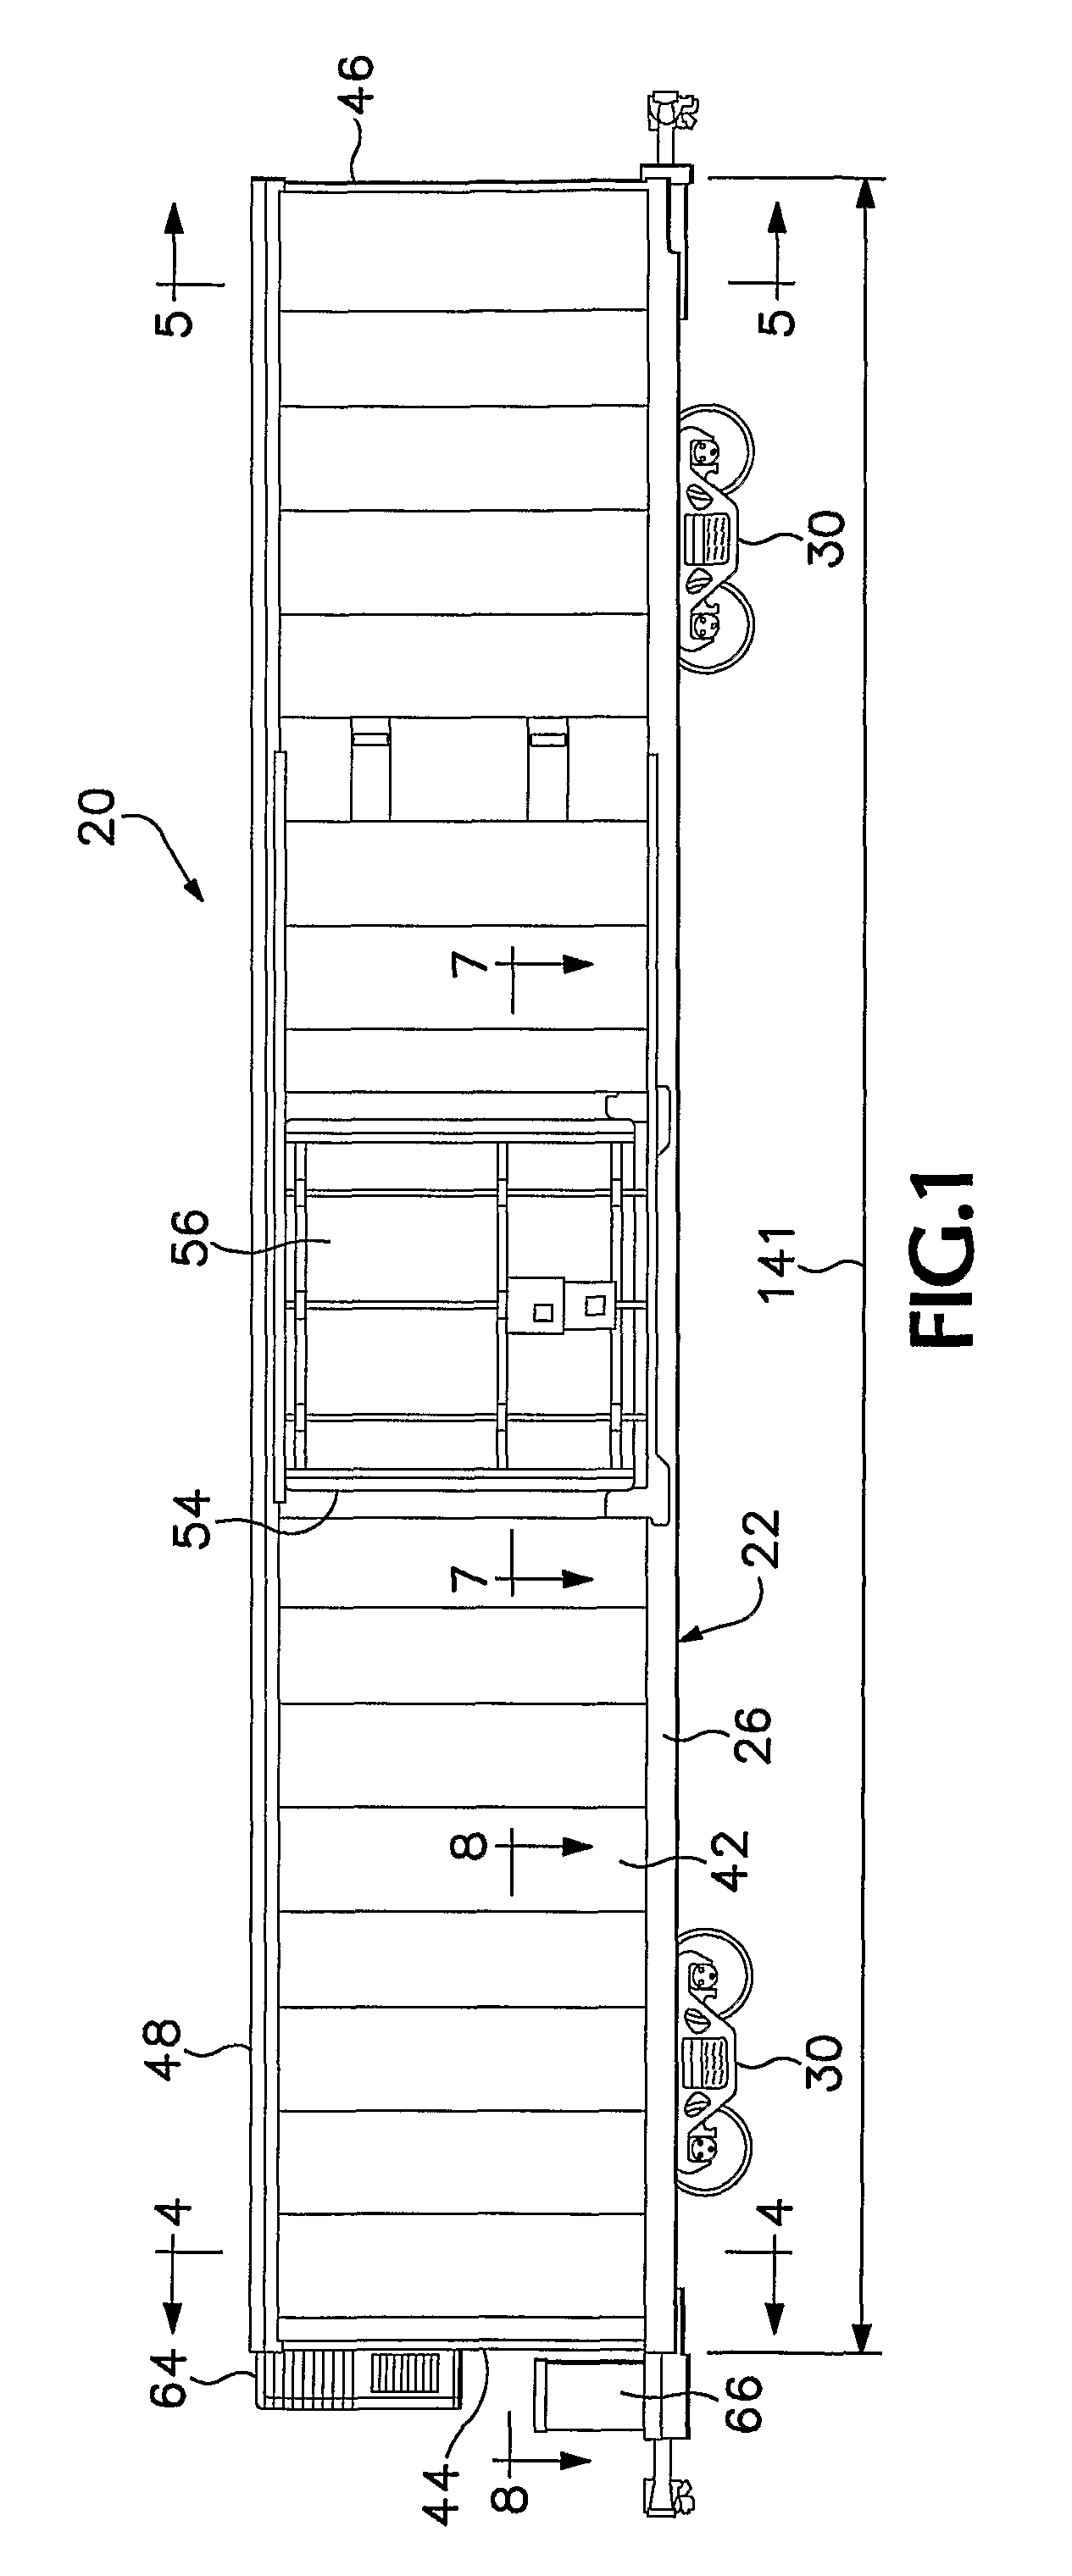 Air flow direction in a temperature controlled railroad freight car